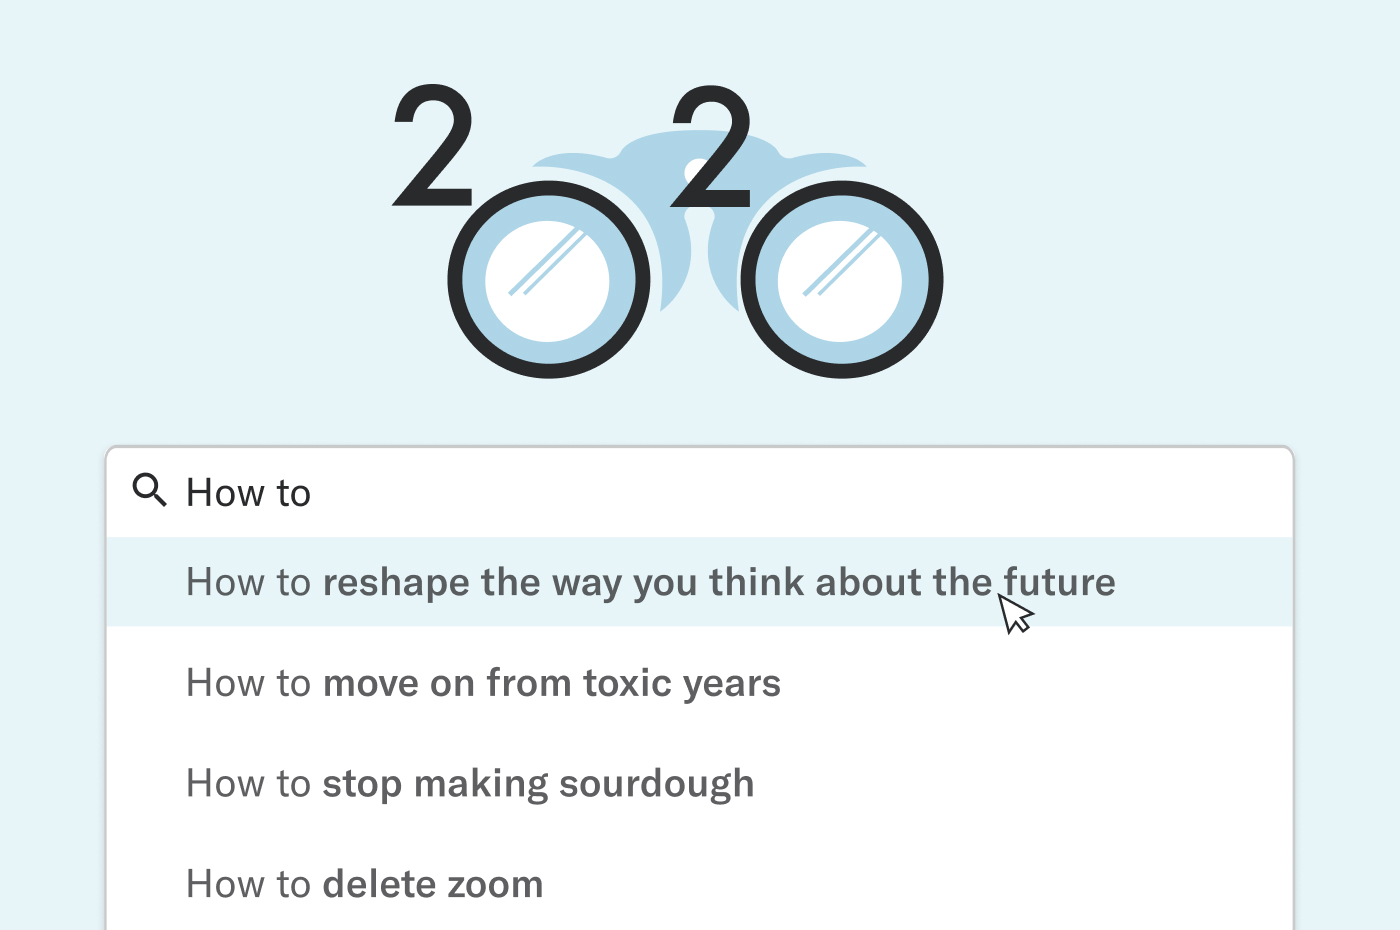 Google search home screen. "google" is replaced with "2020", the Zeros in 2020 look like a pair of binoculars. the words "how to" are typed in the search bar. In the drop down suggested searches: "how to reshape the way you think about the future", How to move on from toxic years"
"how to stop making sourdough" and "how to delete Zoom"